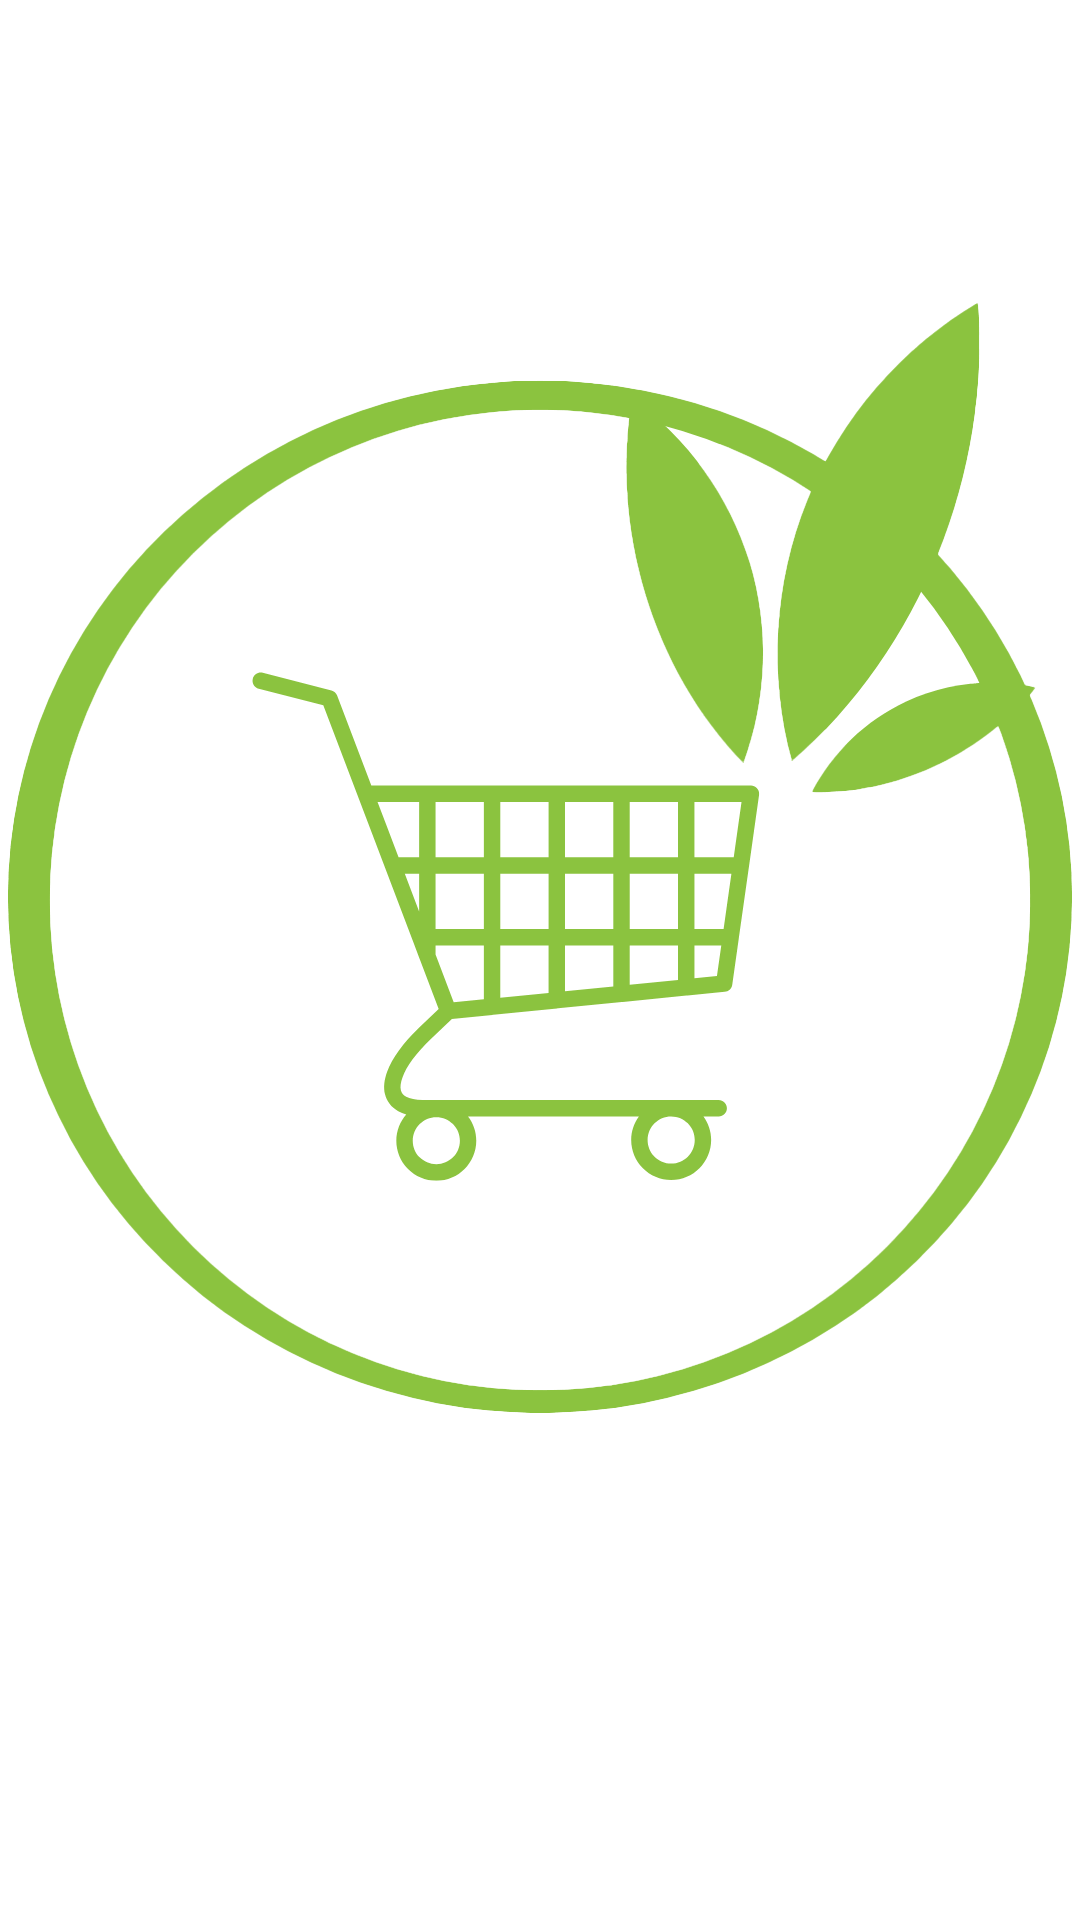 Outlined green shopping cart icon with leaf design on a white background for eco-friendly online shopping.